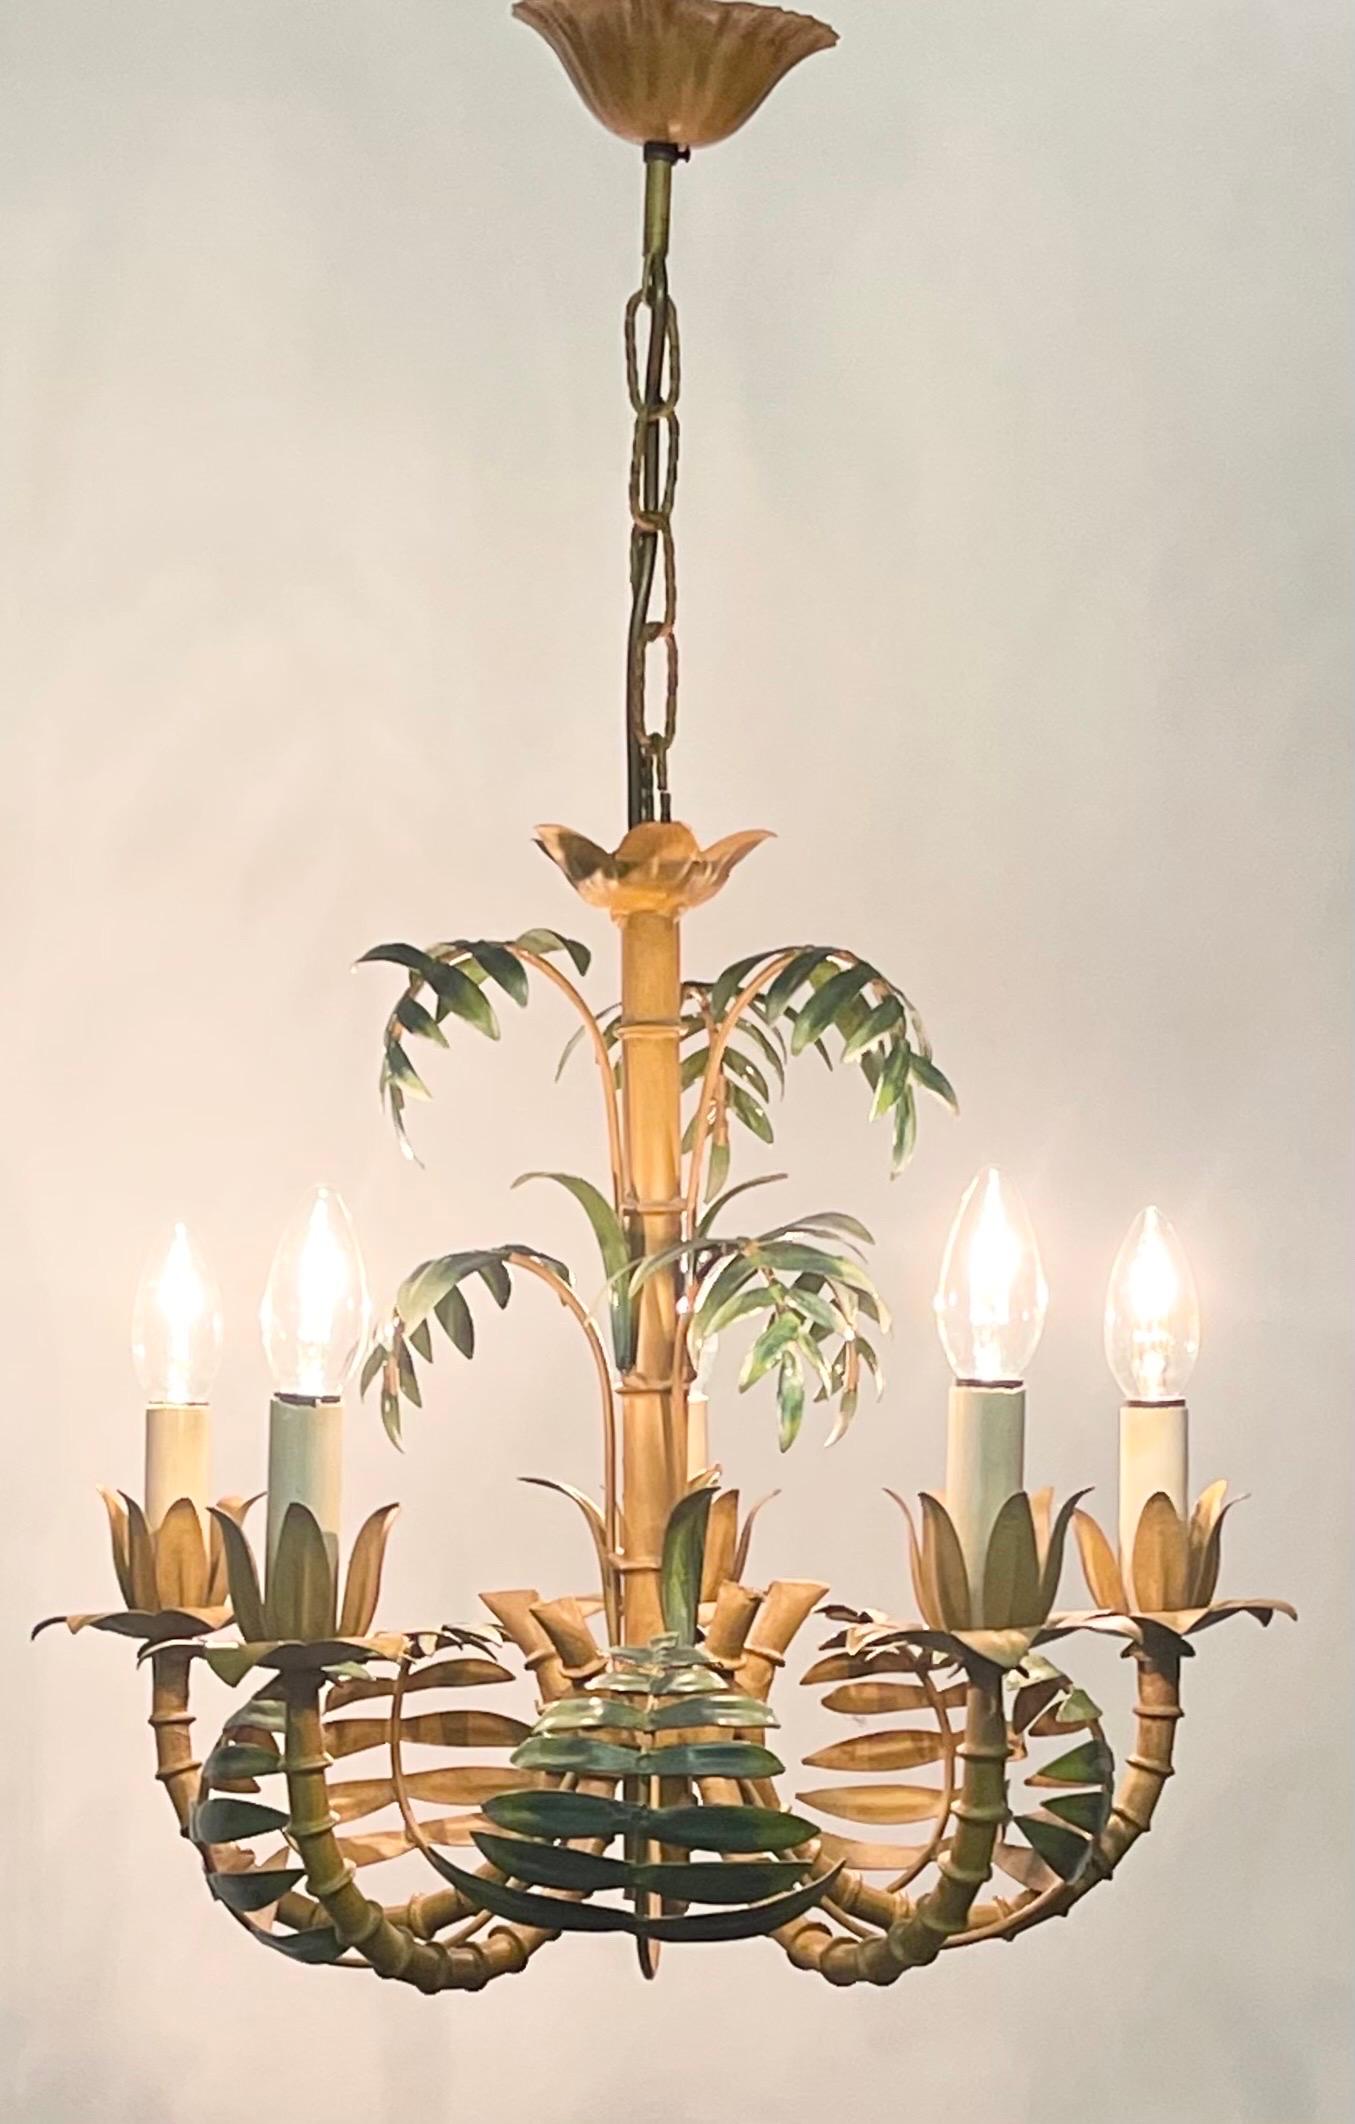 Mid-20th Century Faux Bamboo Tole Palm Tree Chandelier, France, circa 1950s For Sale